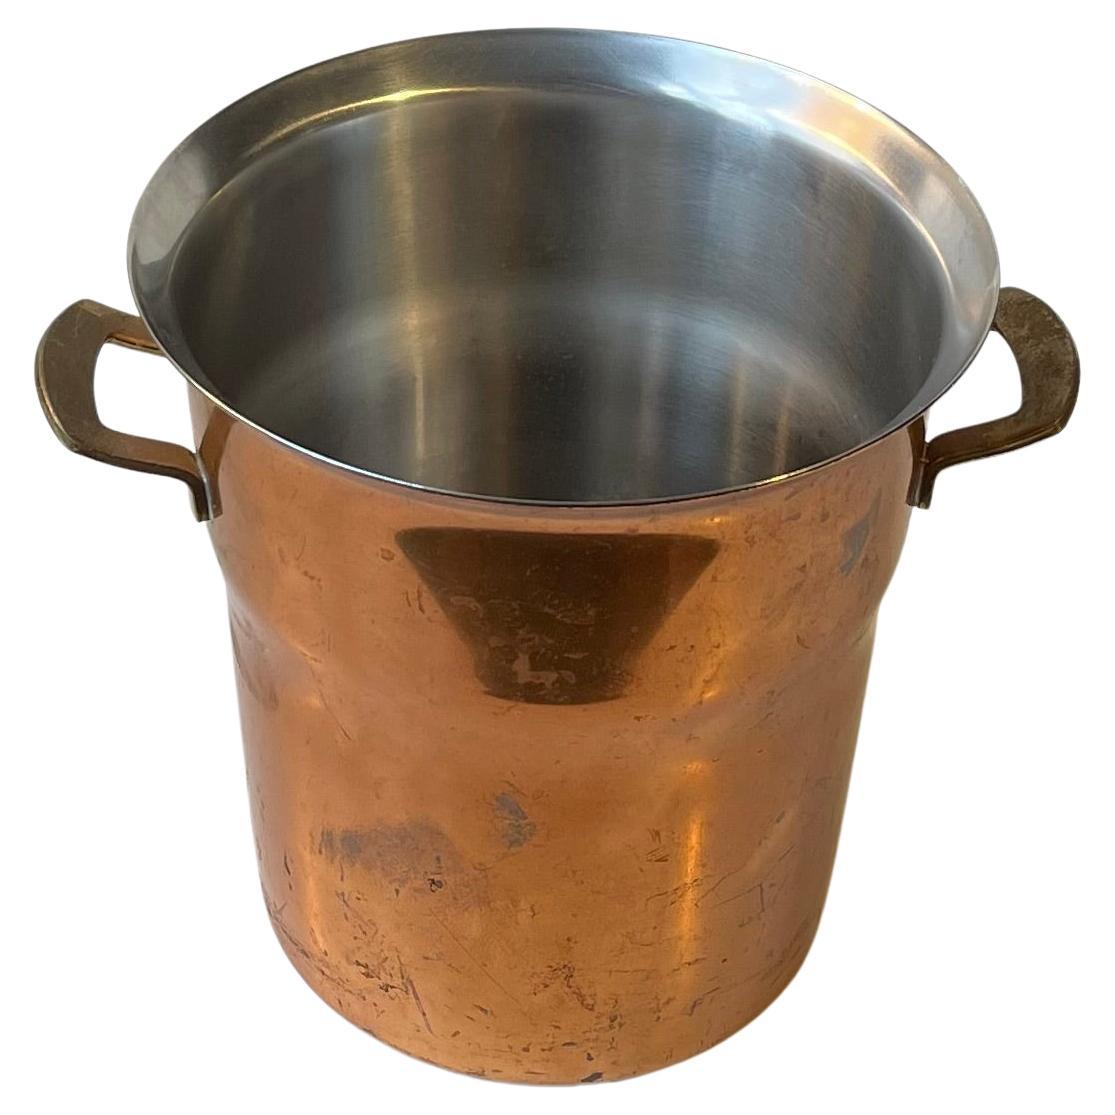 A wellmade champagne or wine cooler fashioned from solid copper and brass and linen with stainless steel for easy cleaning. Designed and made at Spring Culinox in Switzerland circa 1960s to 70s. Reminiscent in style and quality to Hagenauer and